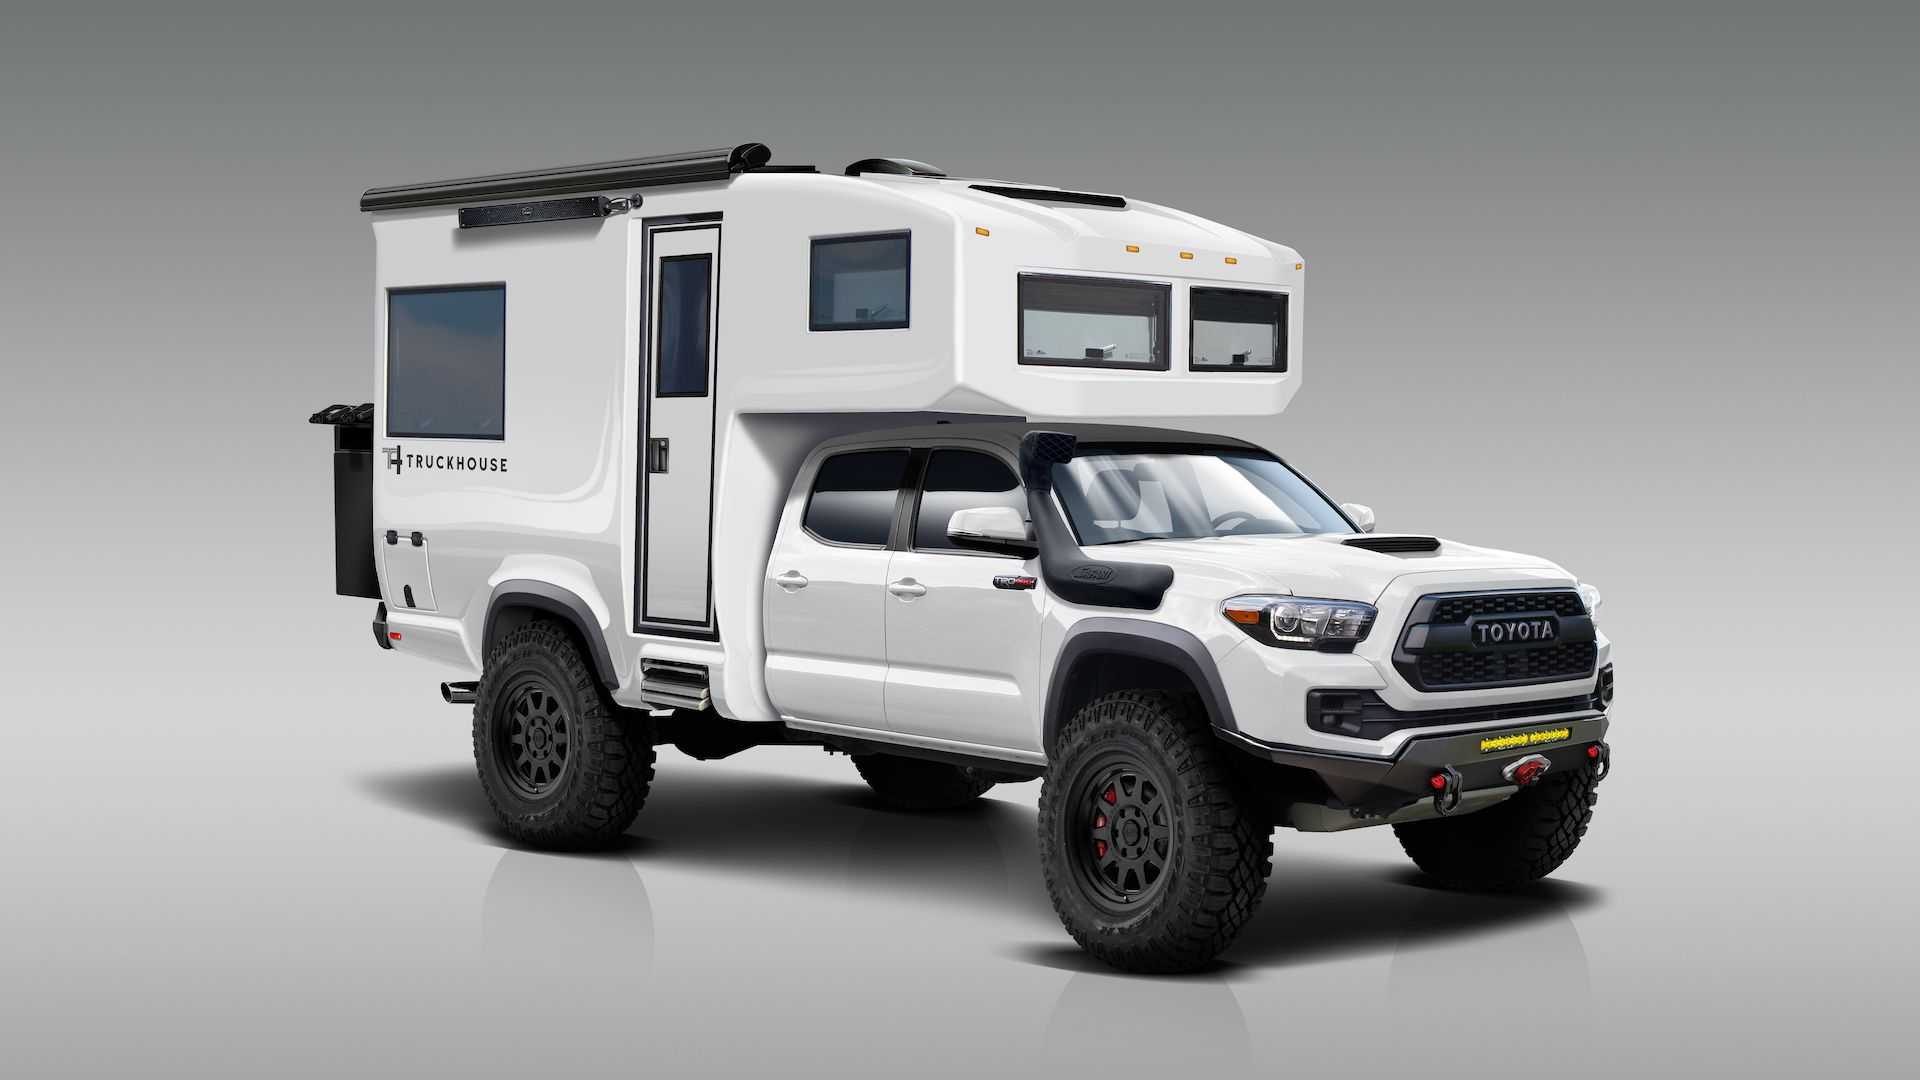 Carbon Reinforced Truckhouse Taa Camper Can Take You Anywhere